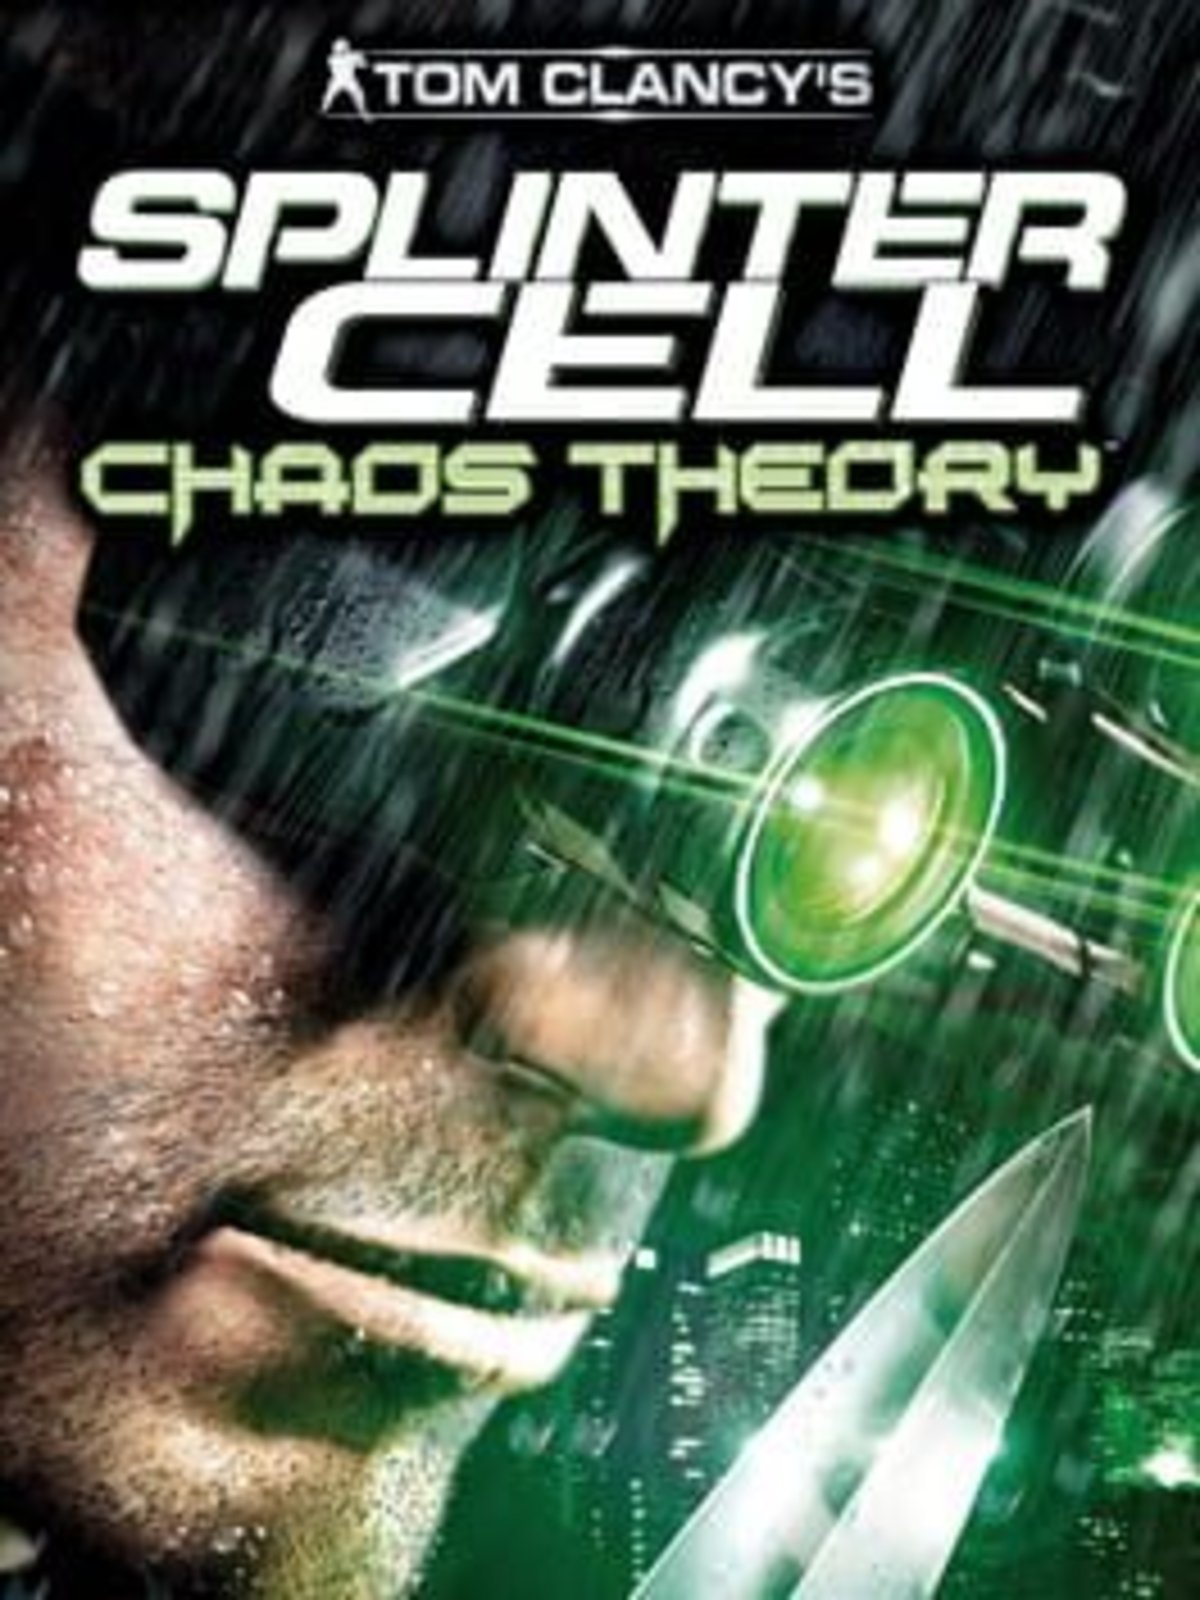 Chaos Theory for PC for a limited time